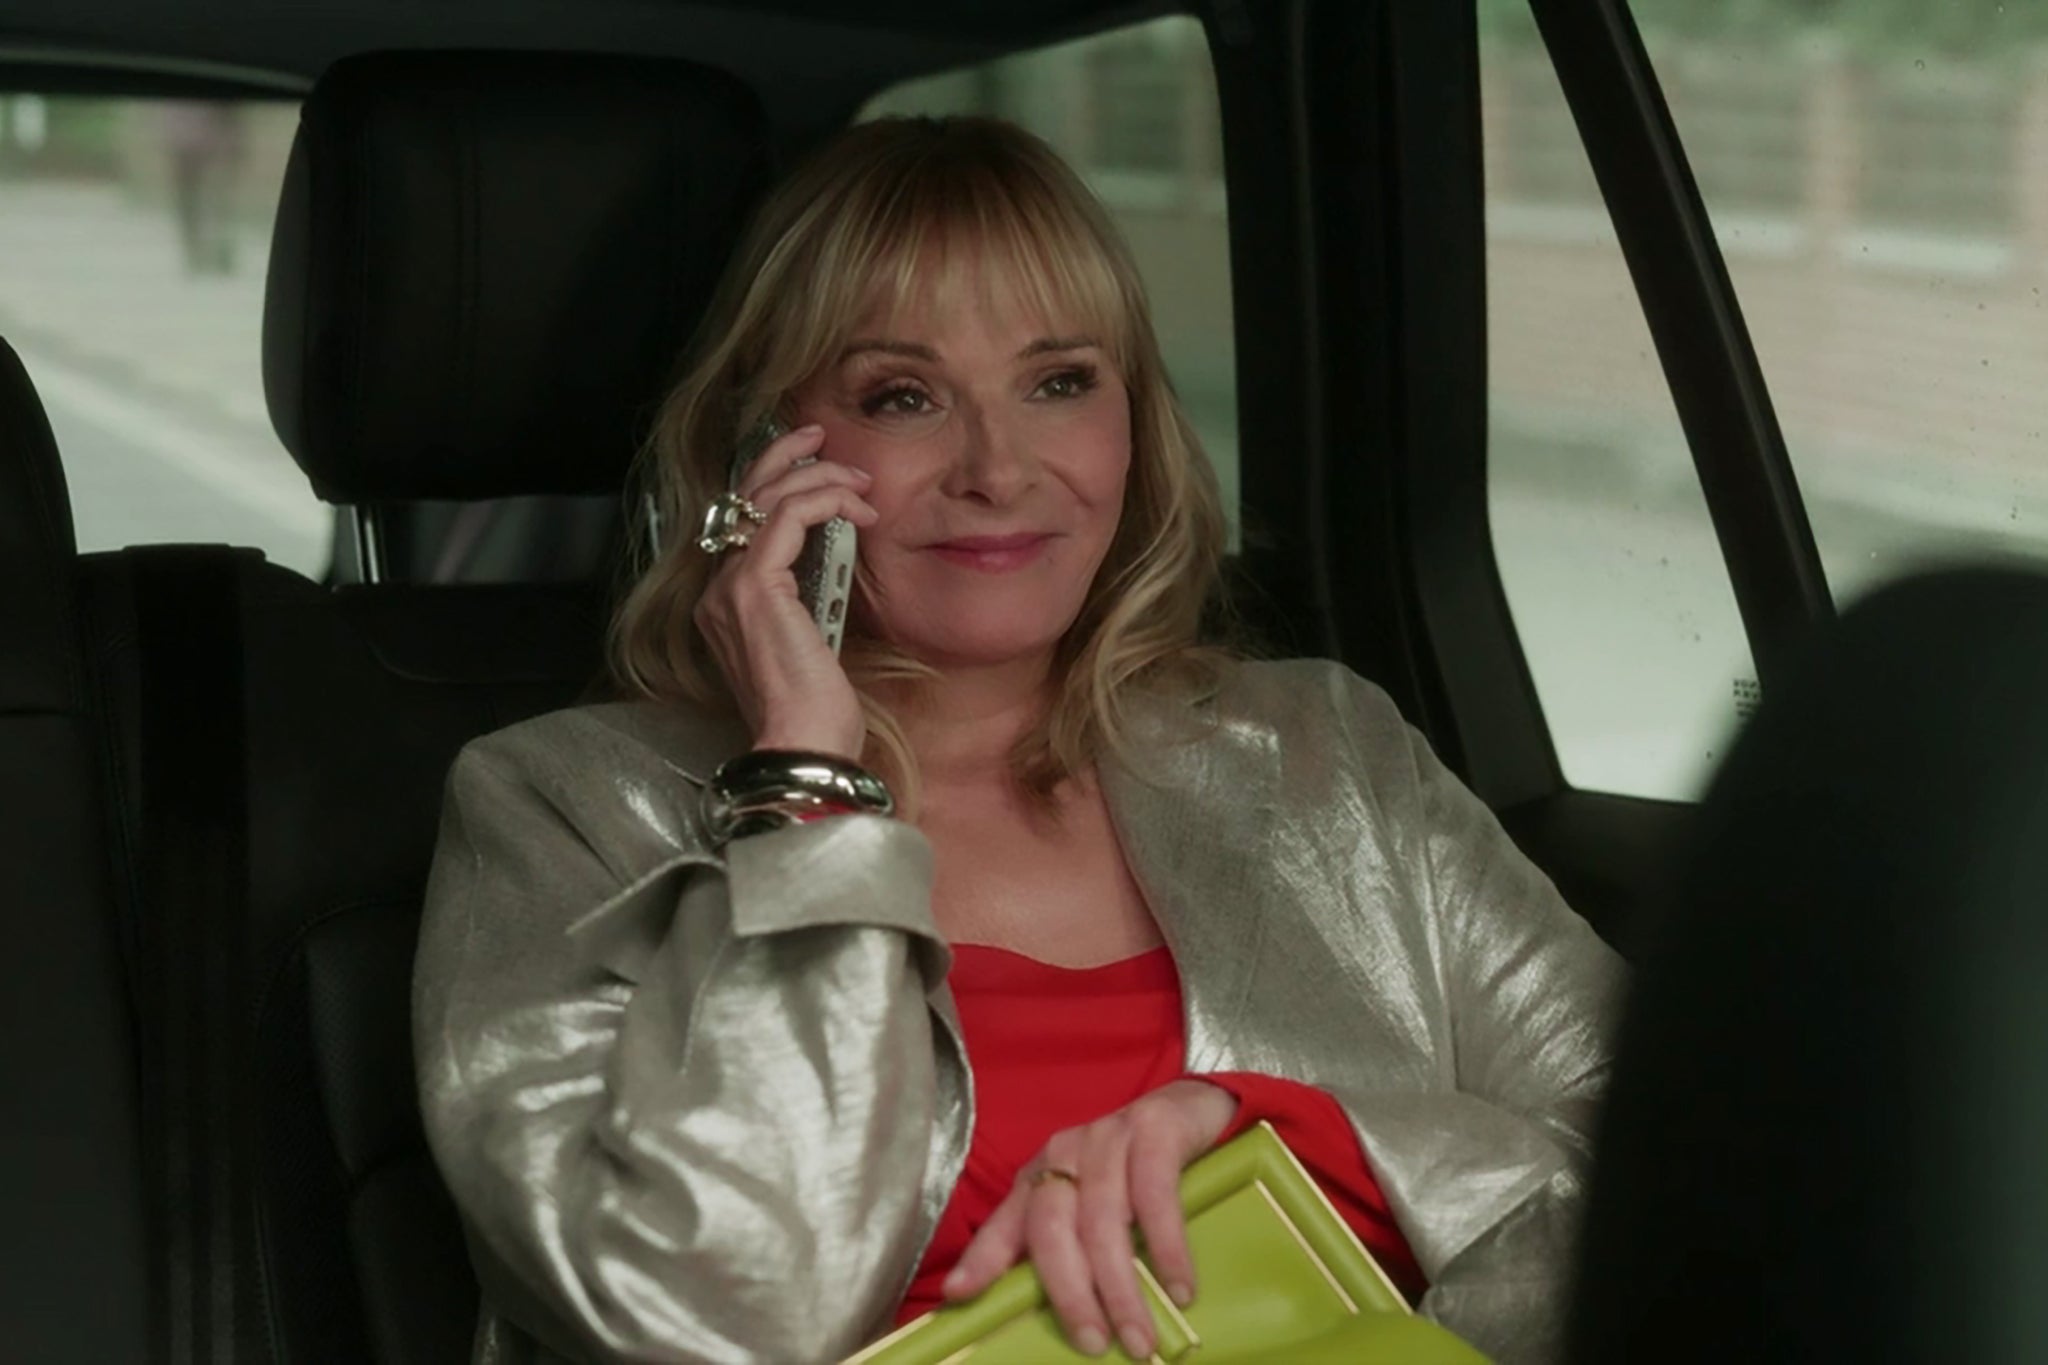 She’s back: Kim Cattrall as Samantha in the ‘And Just Like That...’ finale